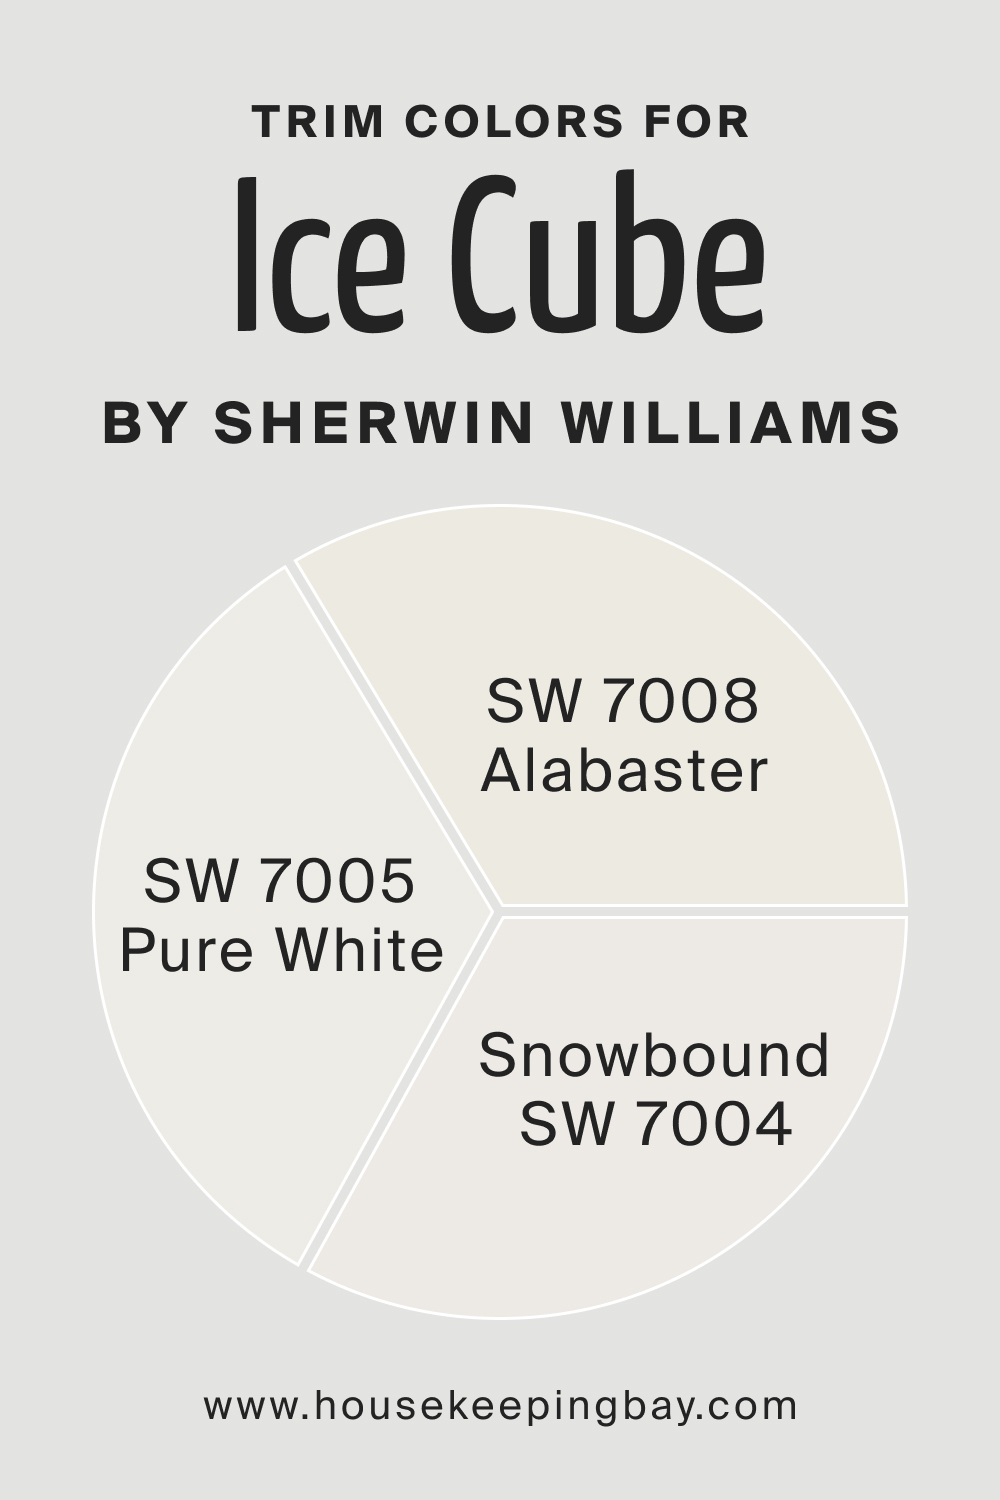 Trim Colors of SW 6252 Ice Cube by Sherwin Williams